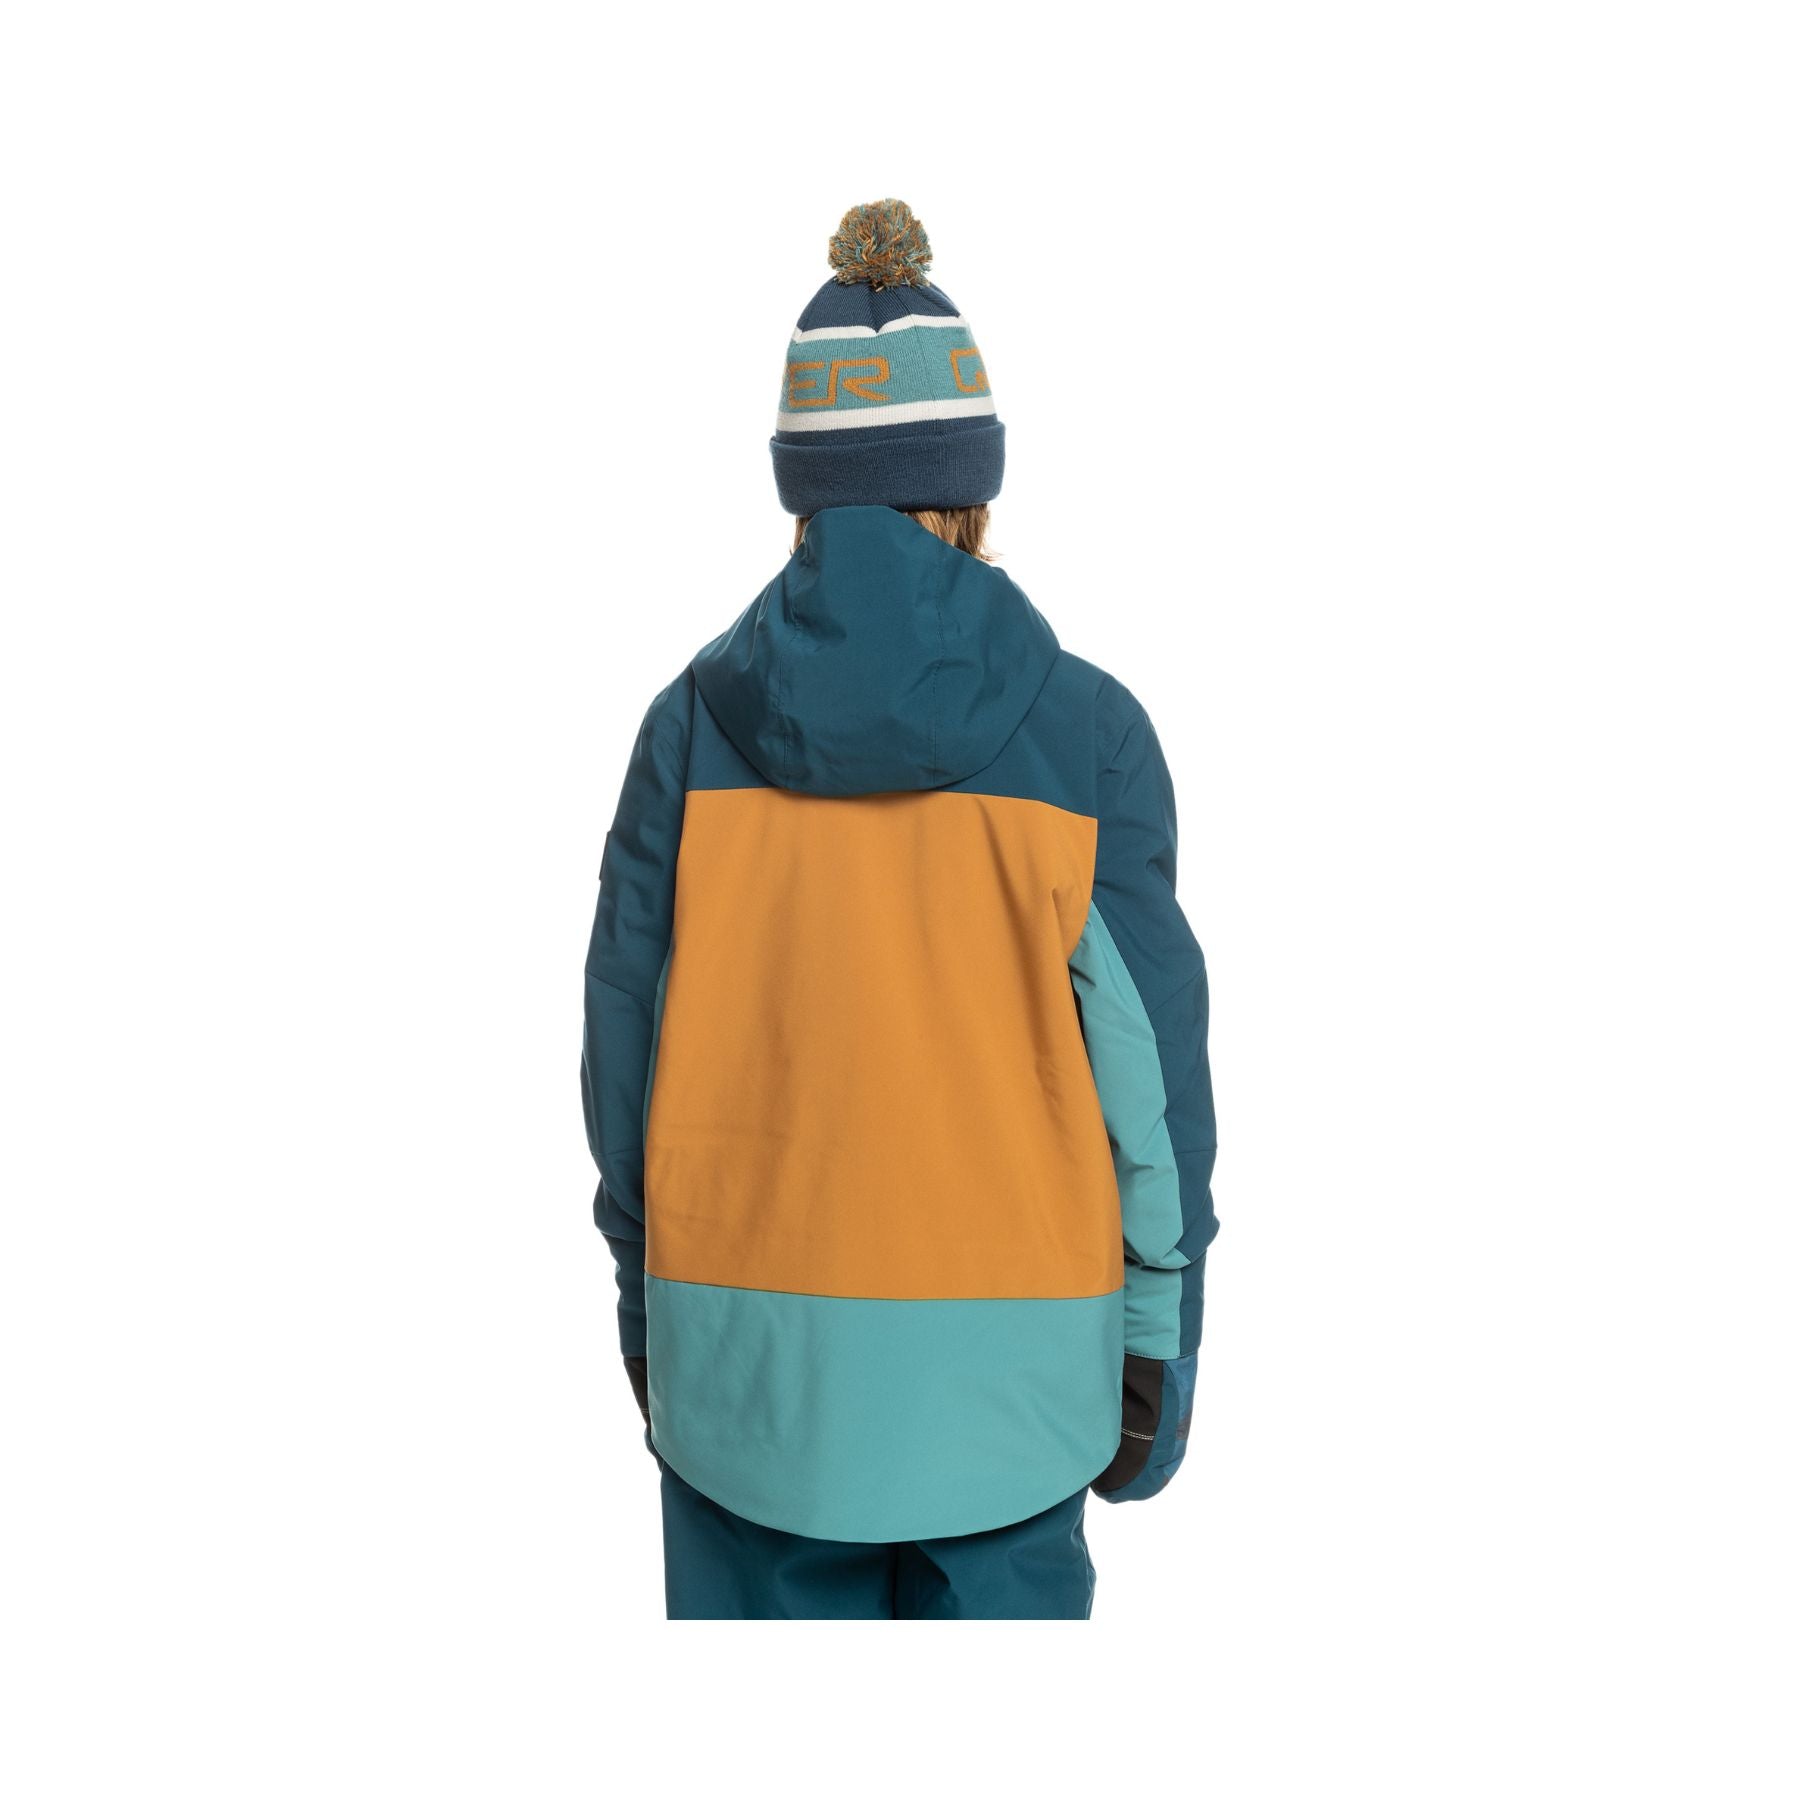 Quiksilver Ambition Youth Jacket in Majolica Blue